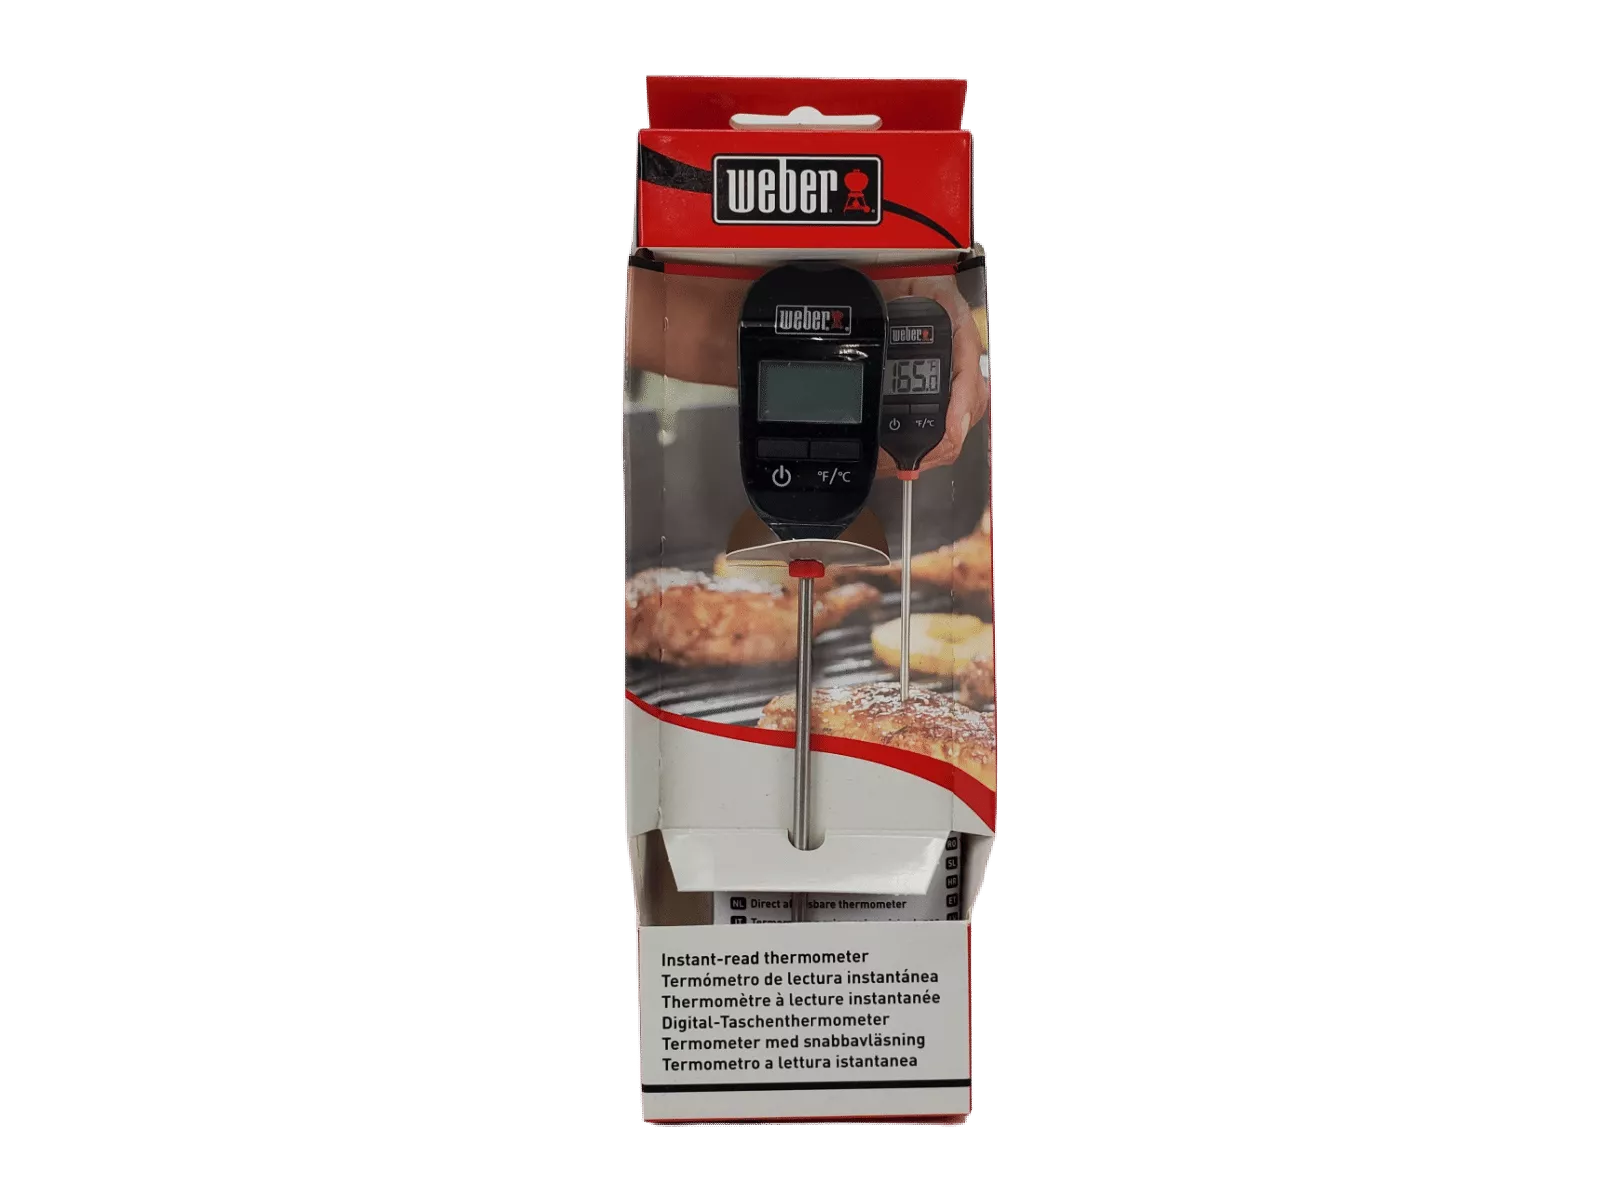 Digital Thermometer in Red and White Packaging - Weber Instant Read Thermometer